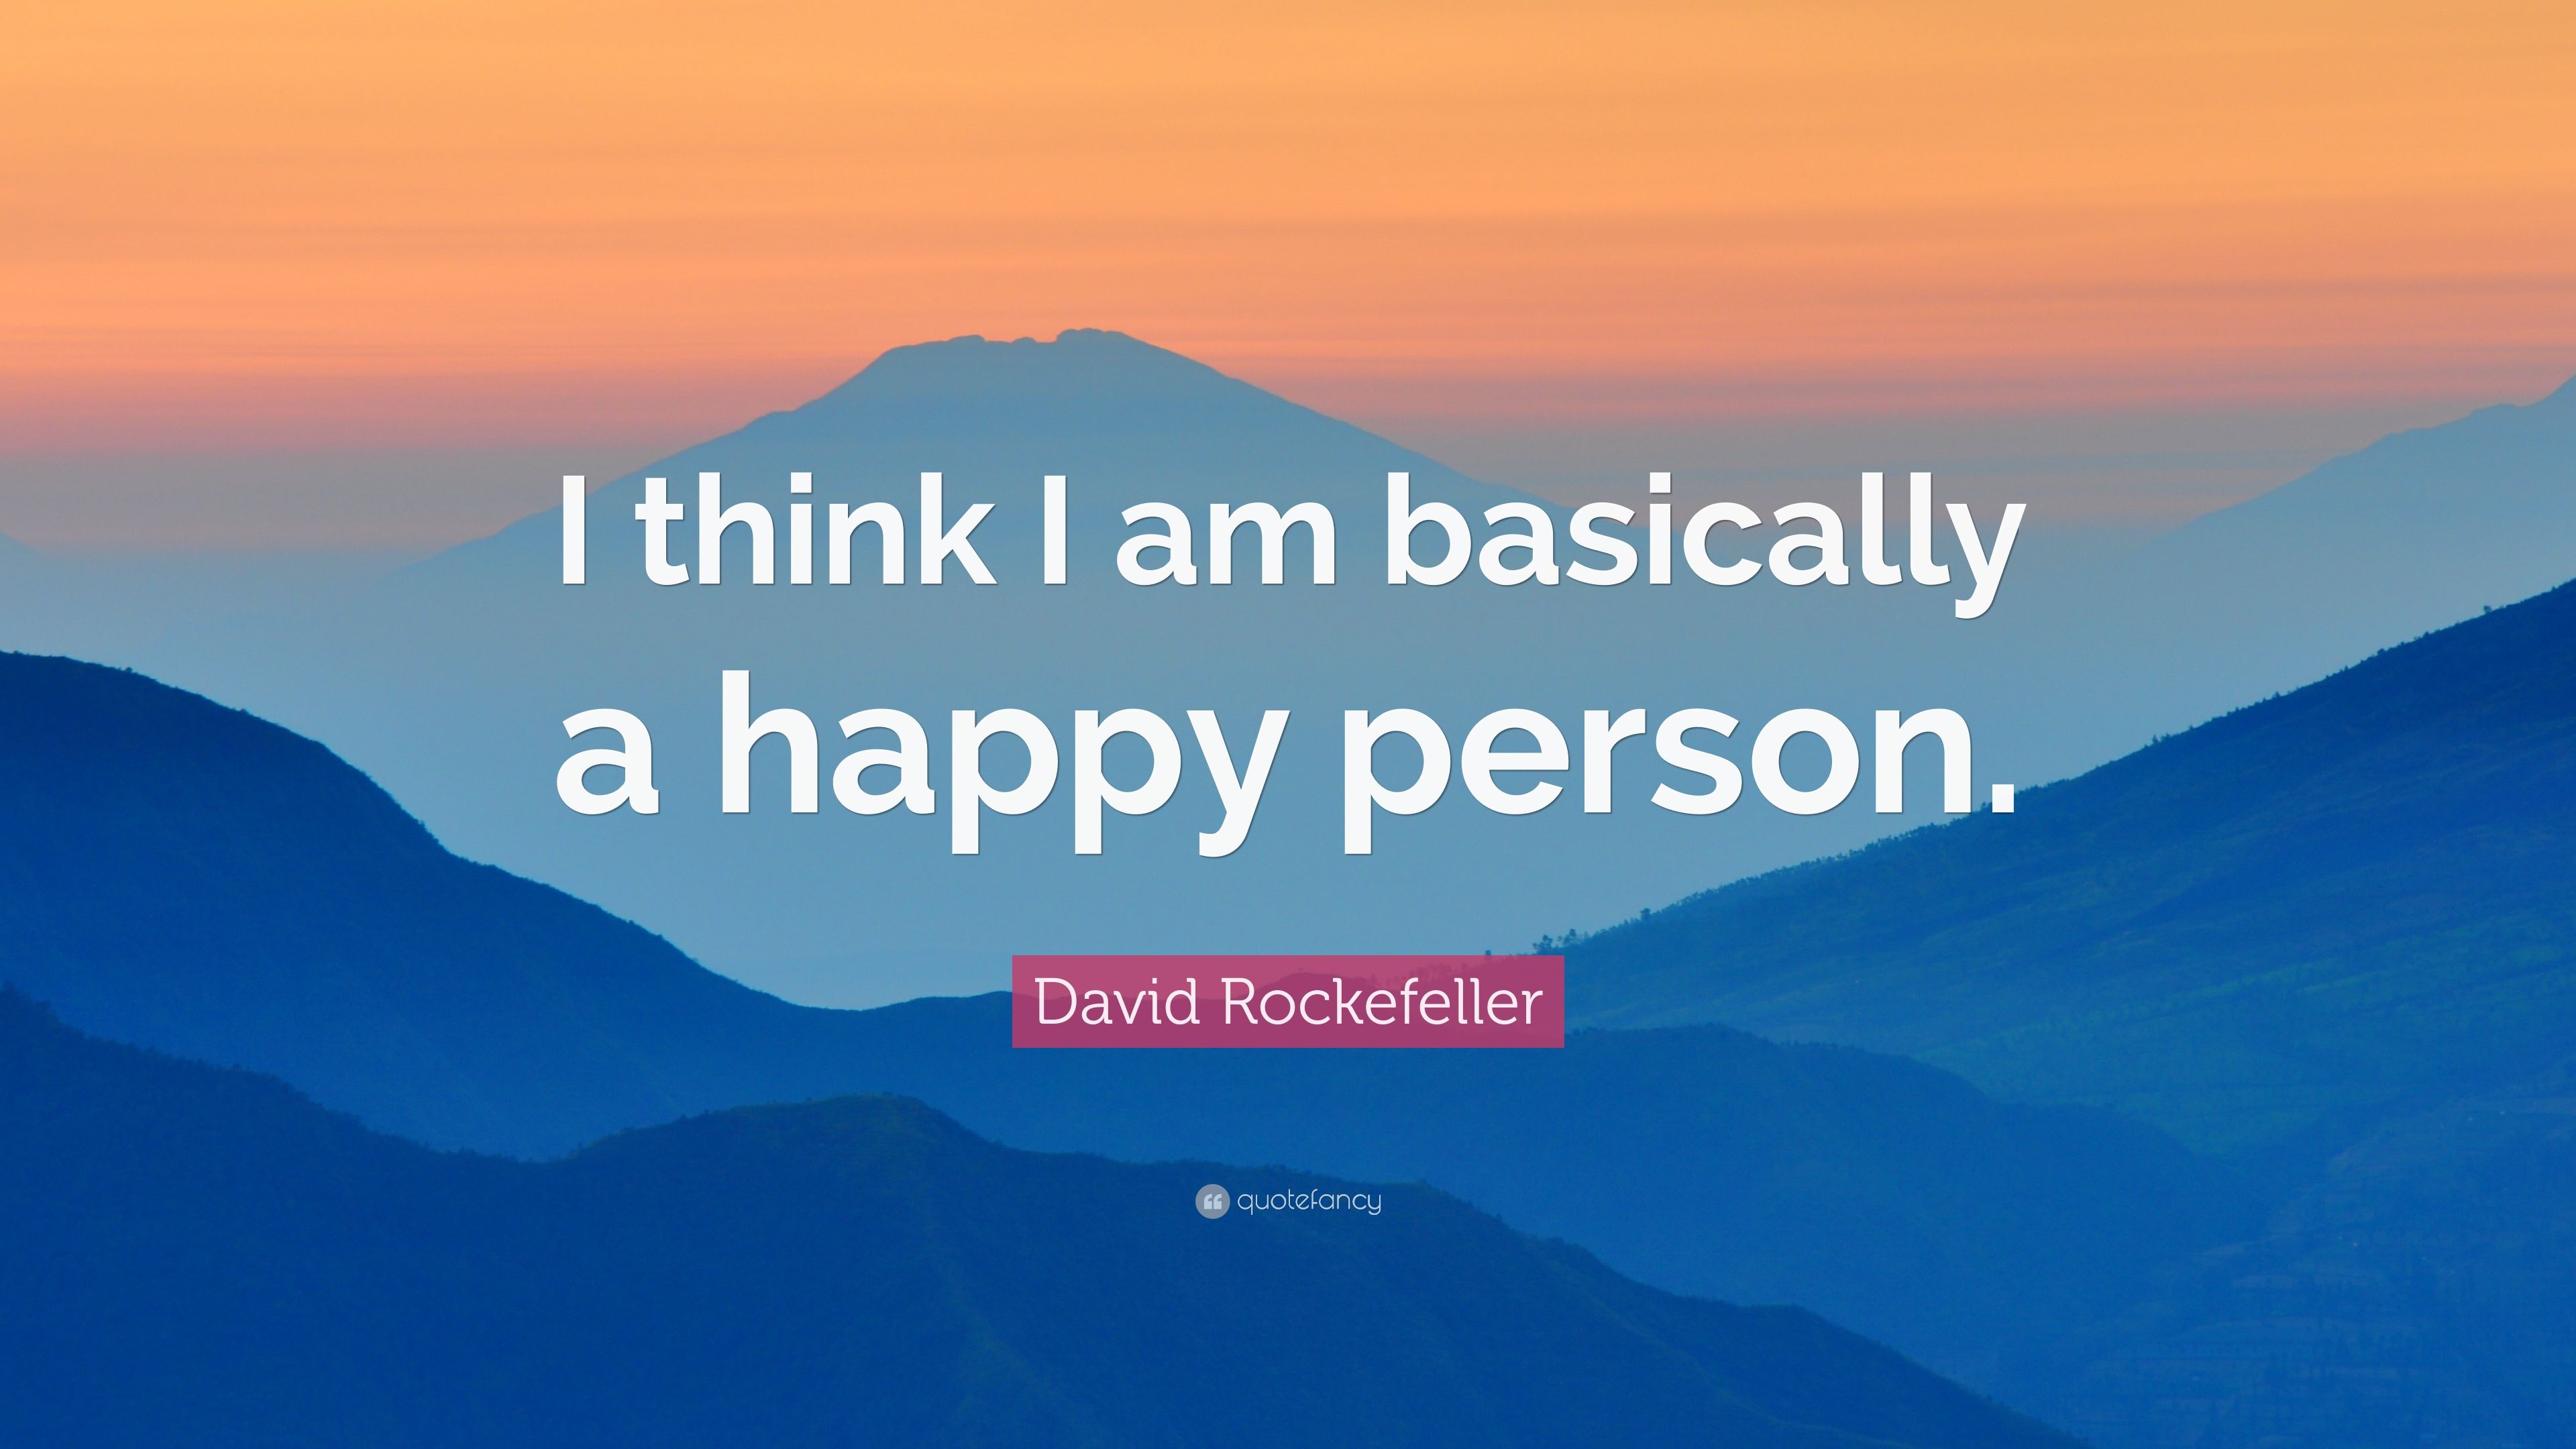 David Rockefeller Quote: “I think I am basically a happy person.”